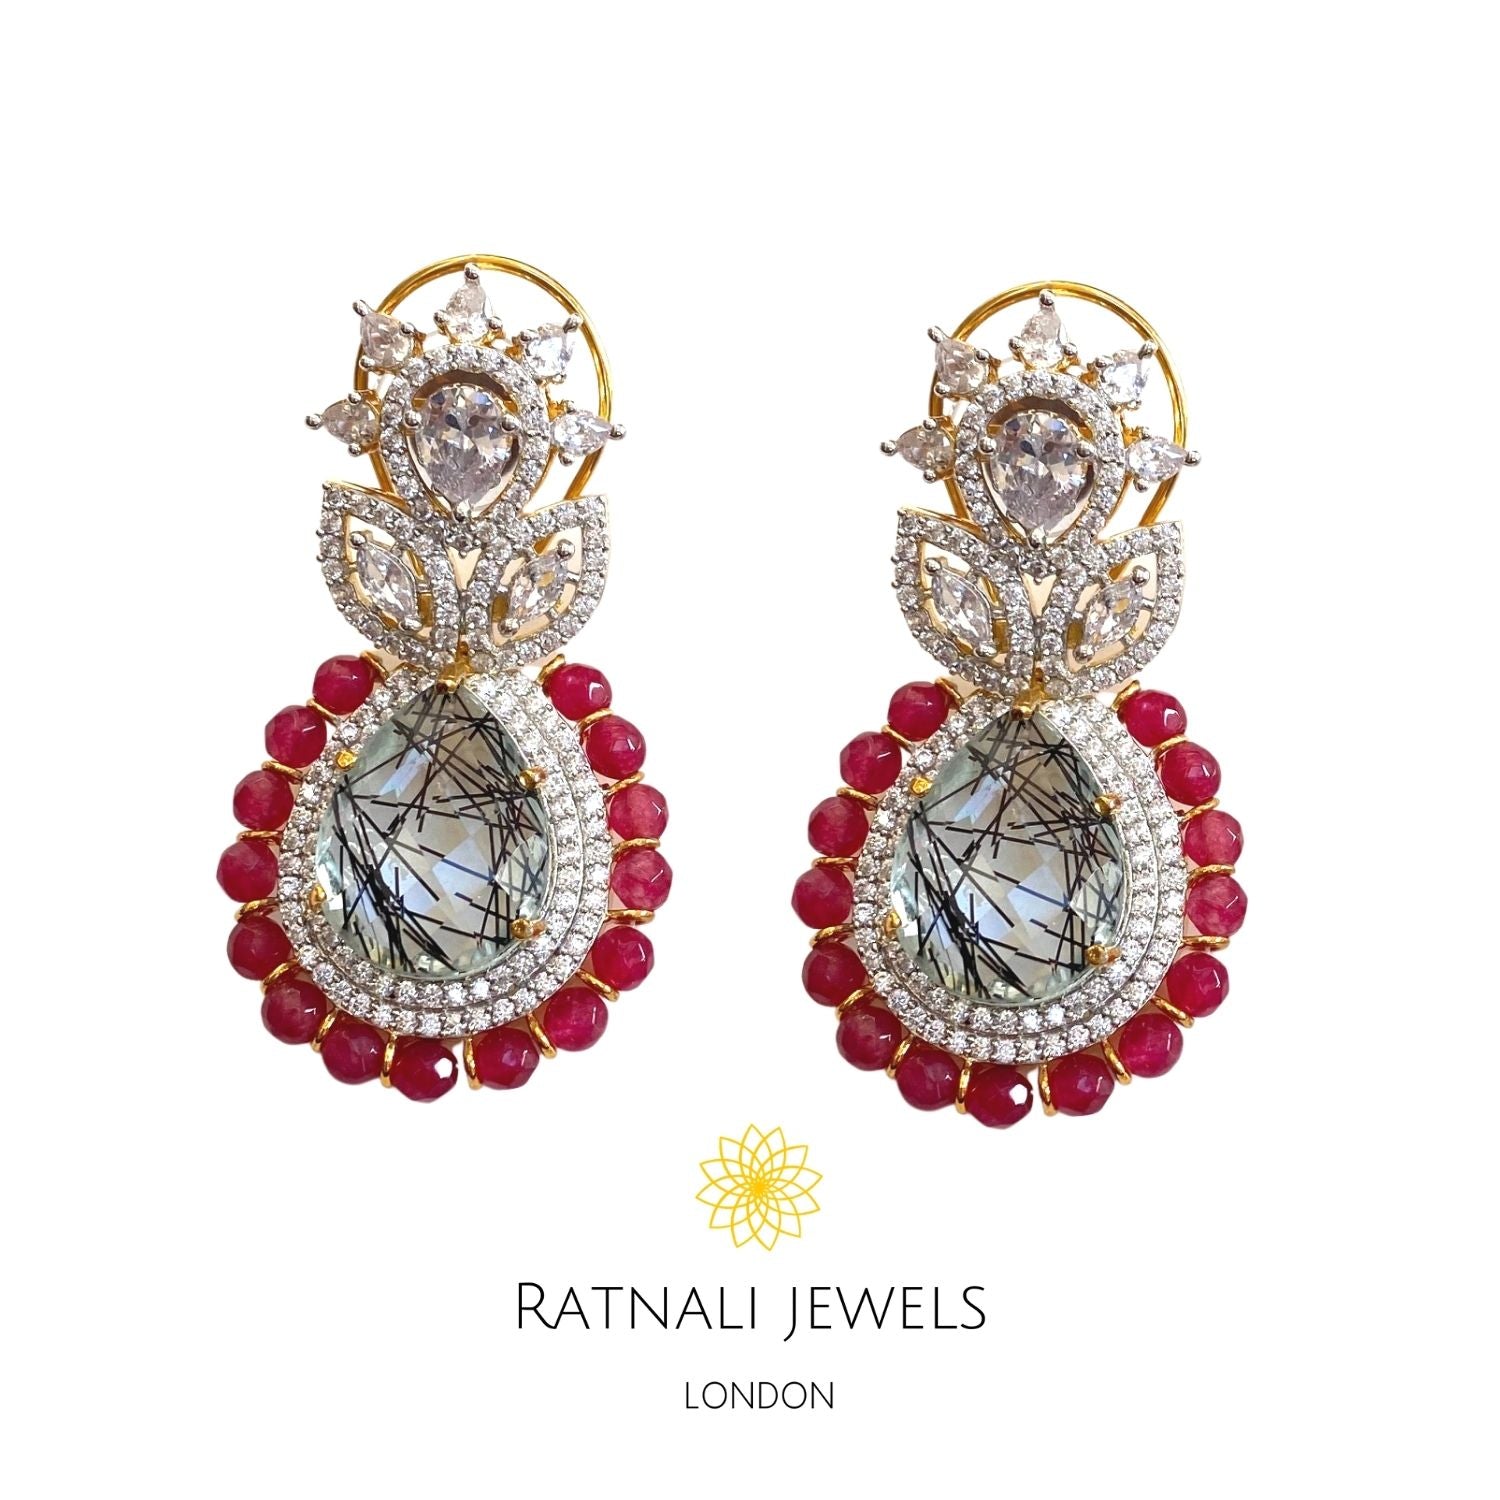 Statement diamond Earrings with Ruby Beads